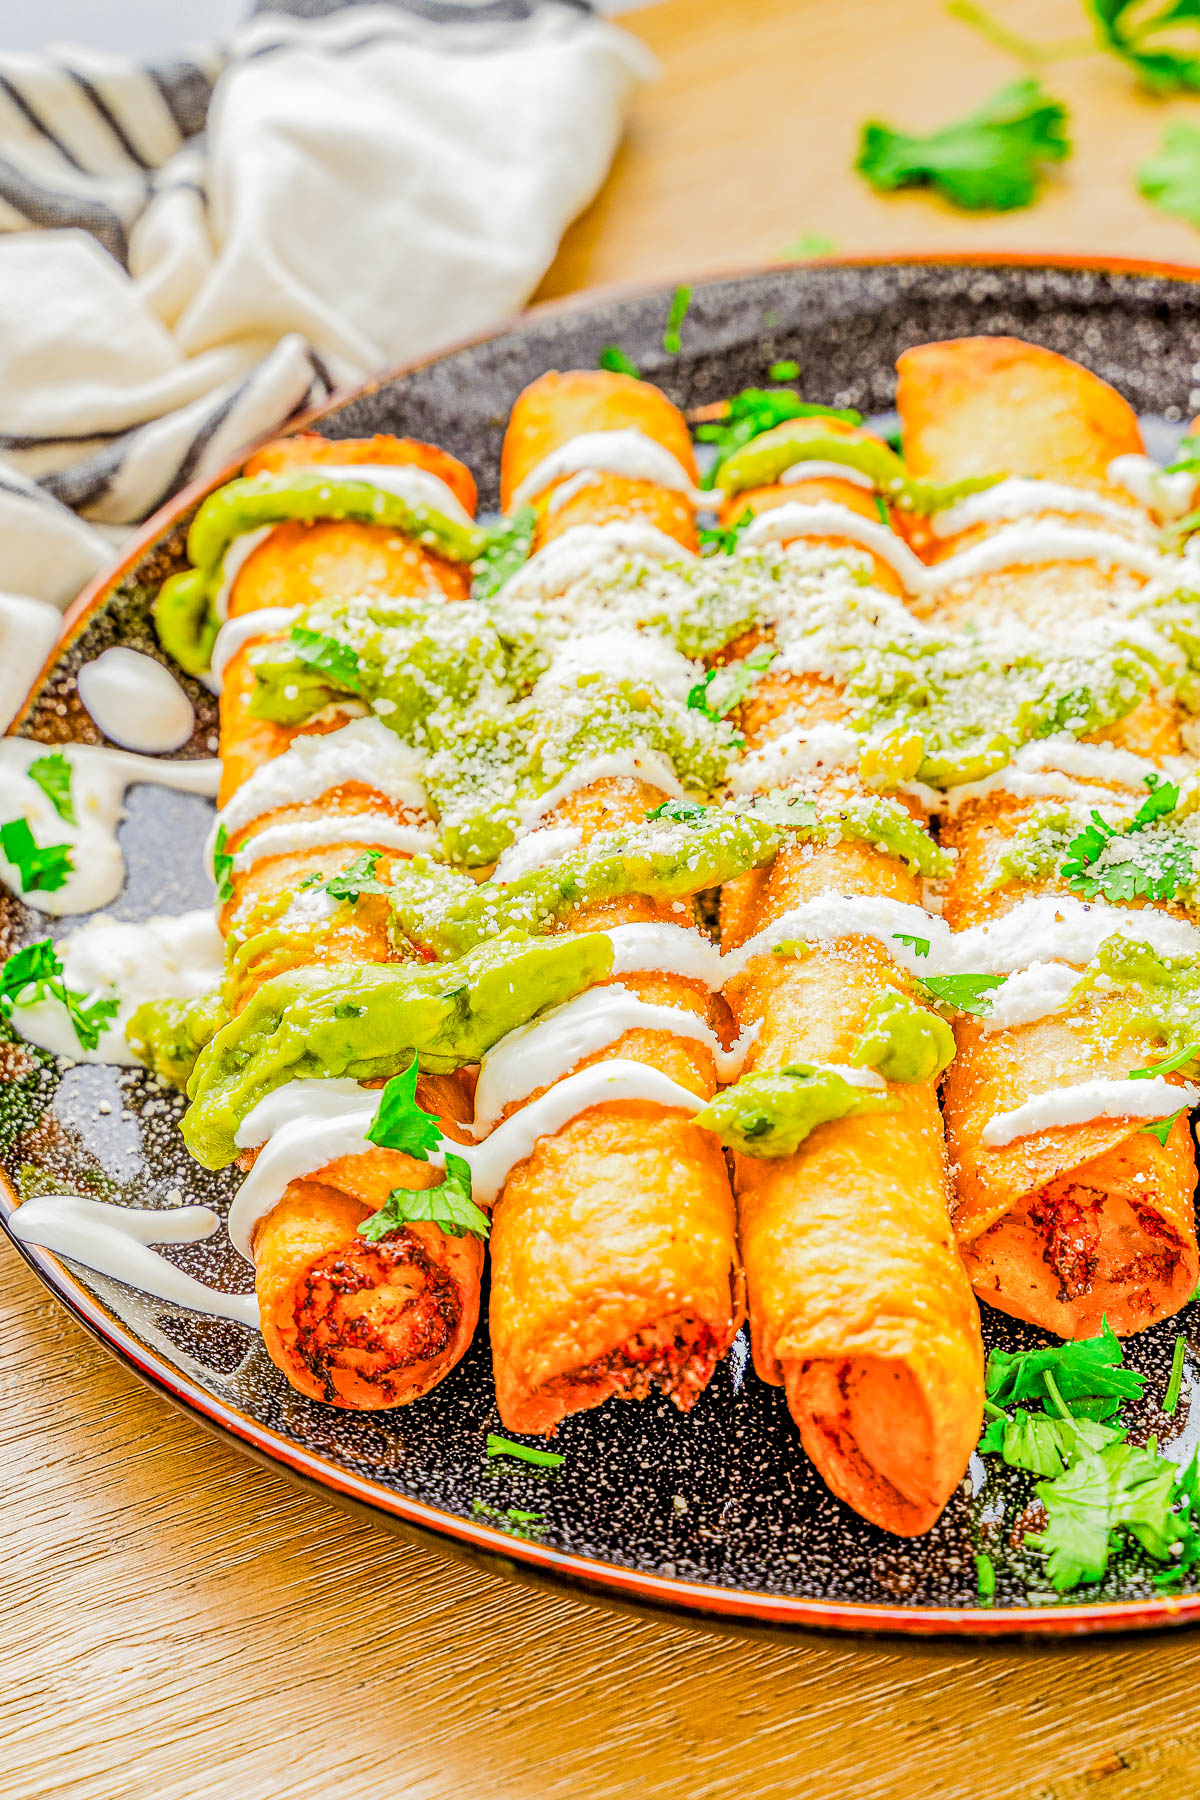 Chicken Taquitos - 🌮🧀🥑 Learn how to make the BEST tasting taquitos at home that rival a Mexican restaurant in just 30 minutes with a handful of common ingredients! Crispy and crunchy on the outside, warm melted cheese and seasoned chicken on the inside, these will be a hit at your next fiesta or casual get-together! Instructions provided to bake, air fry, or fry so you're set to make this EASY recipe!